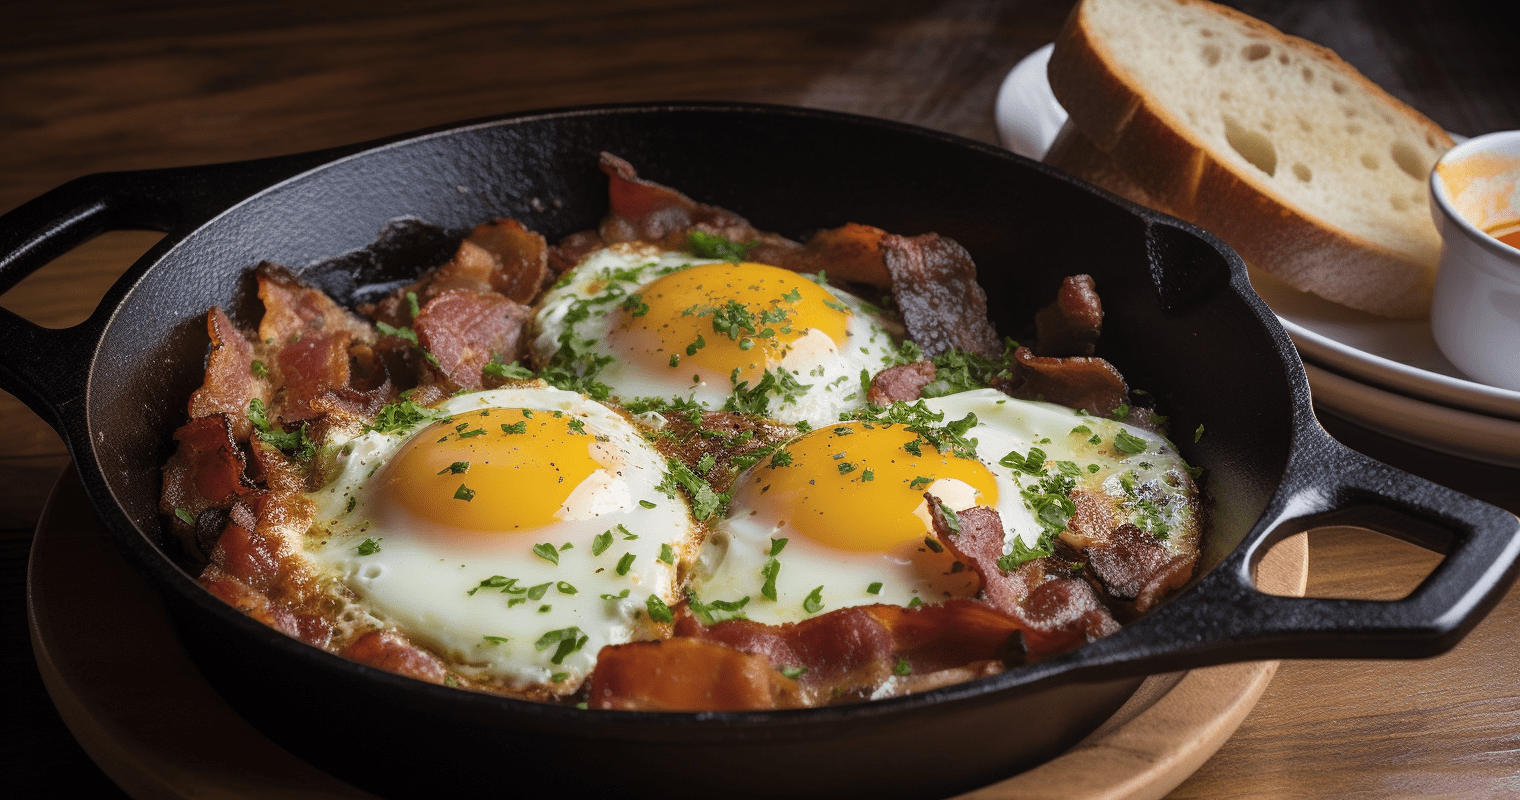 Smoky Bacon and Egg Skillet Cooking Instructions